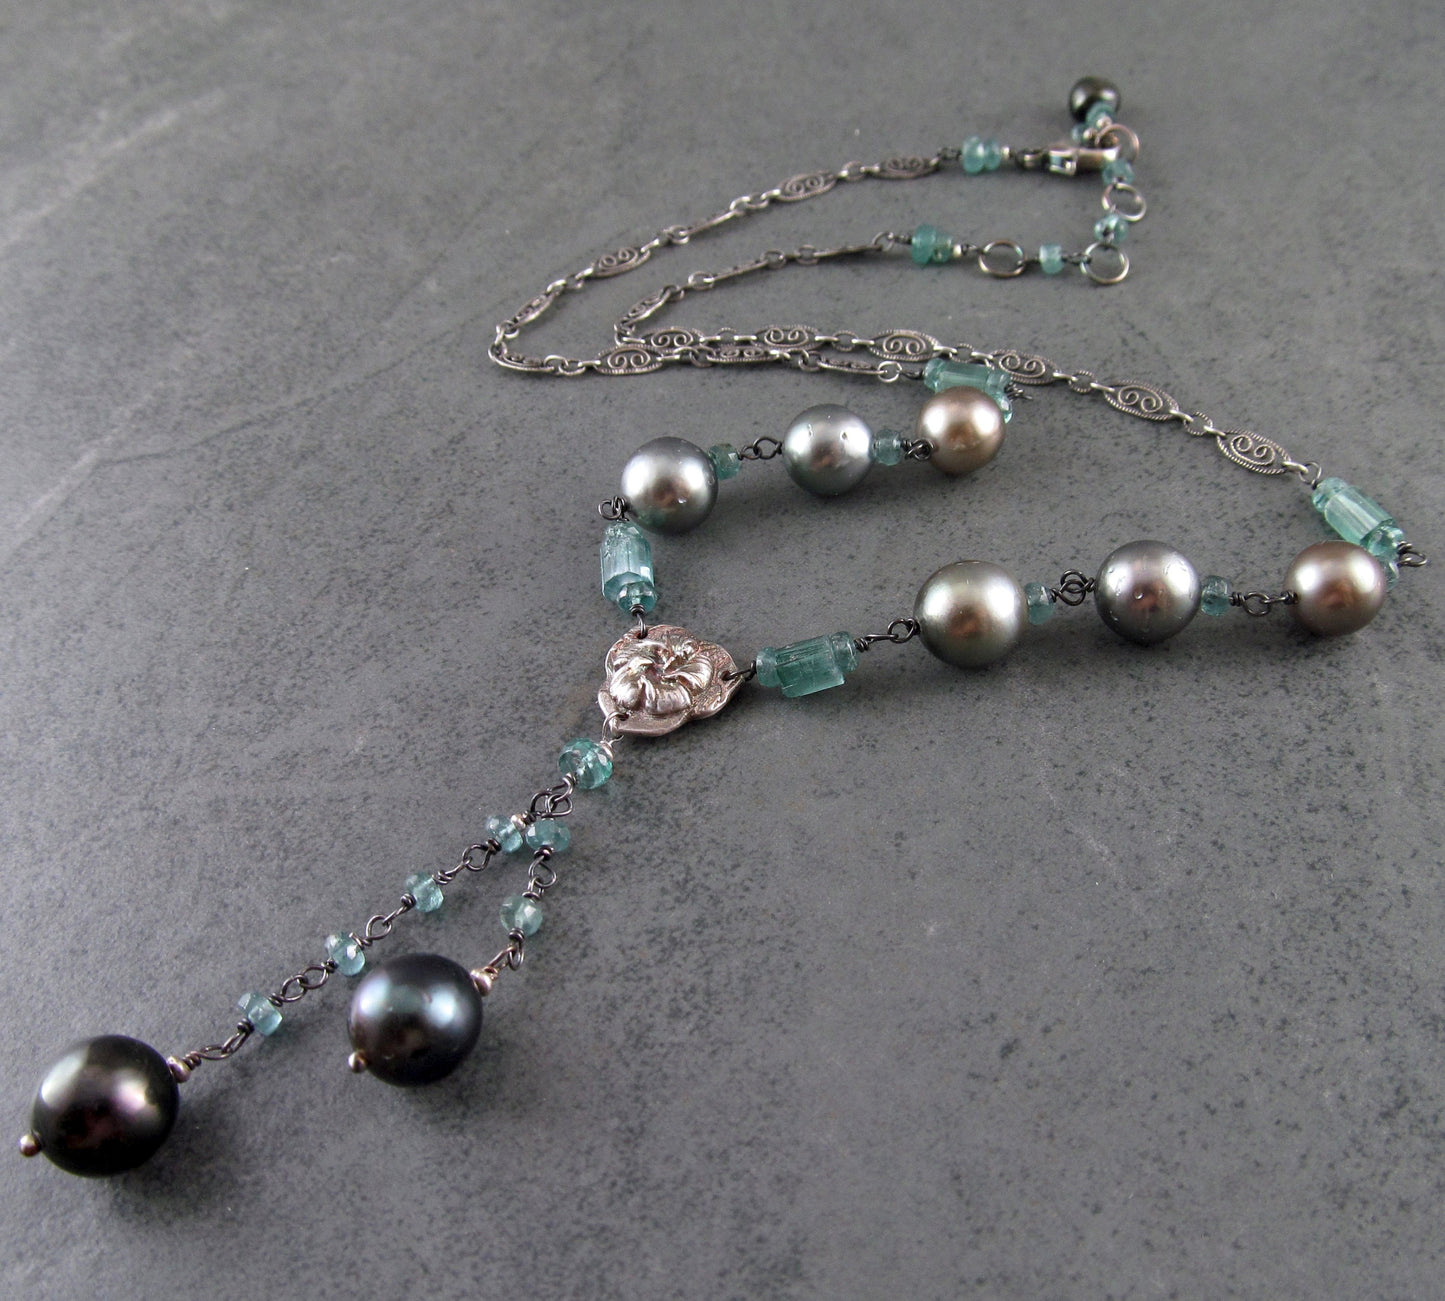 Blue tourmaline necklace with black & silver Tahitian pearls, recycled fine silver hibiscus and sterling silver necklace-OOAK